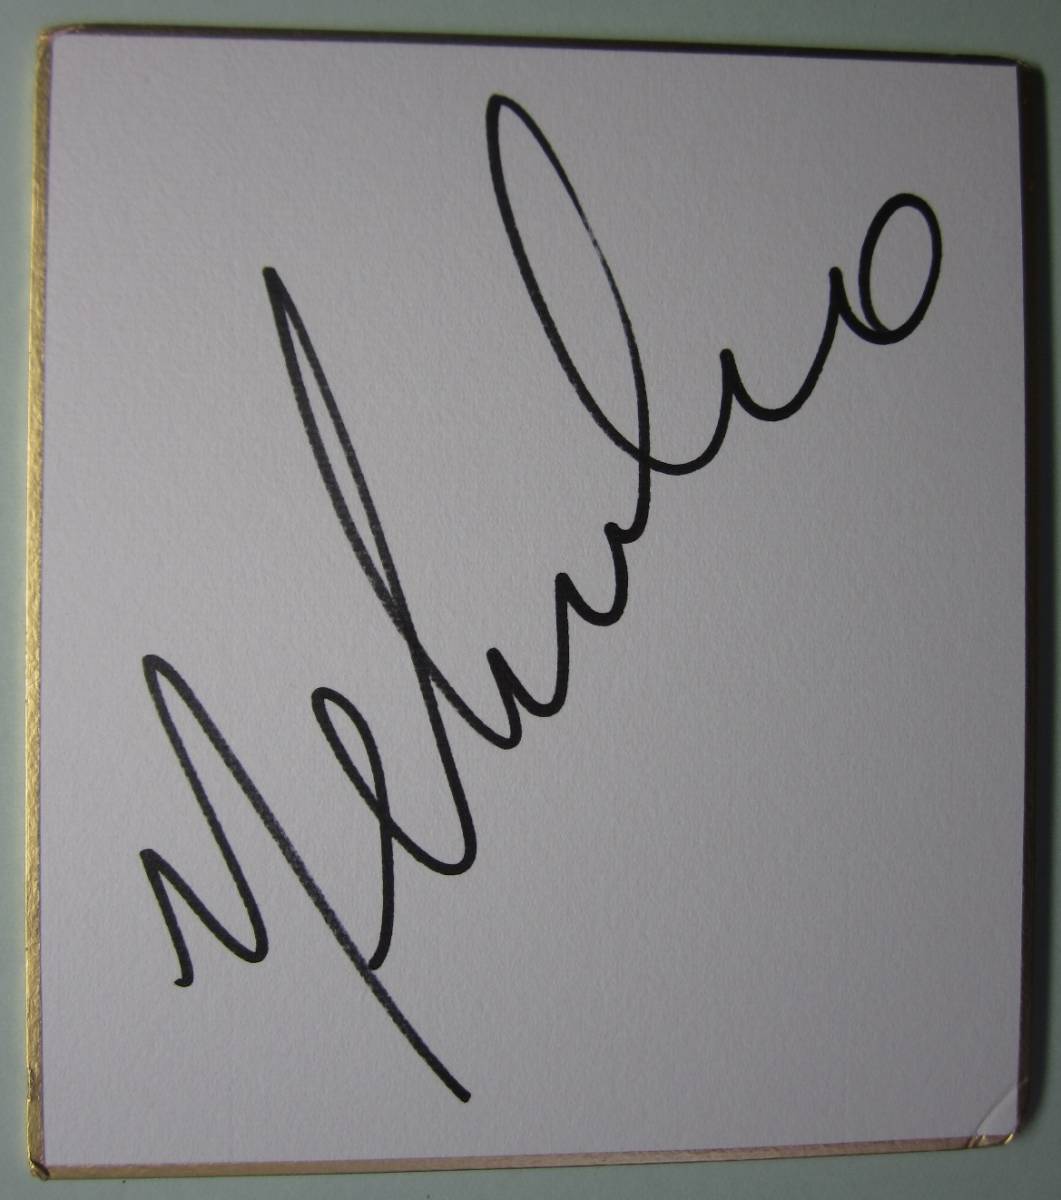 Director Nelsinho Autographed Shikishi - Free Shipping, soccer, Souvenir, Related goods, sign